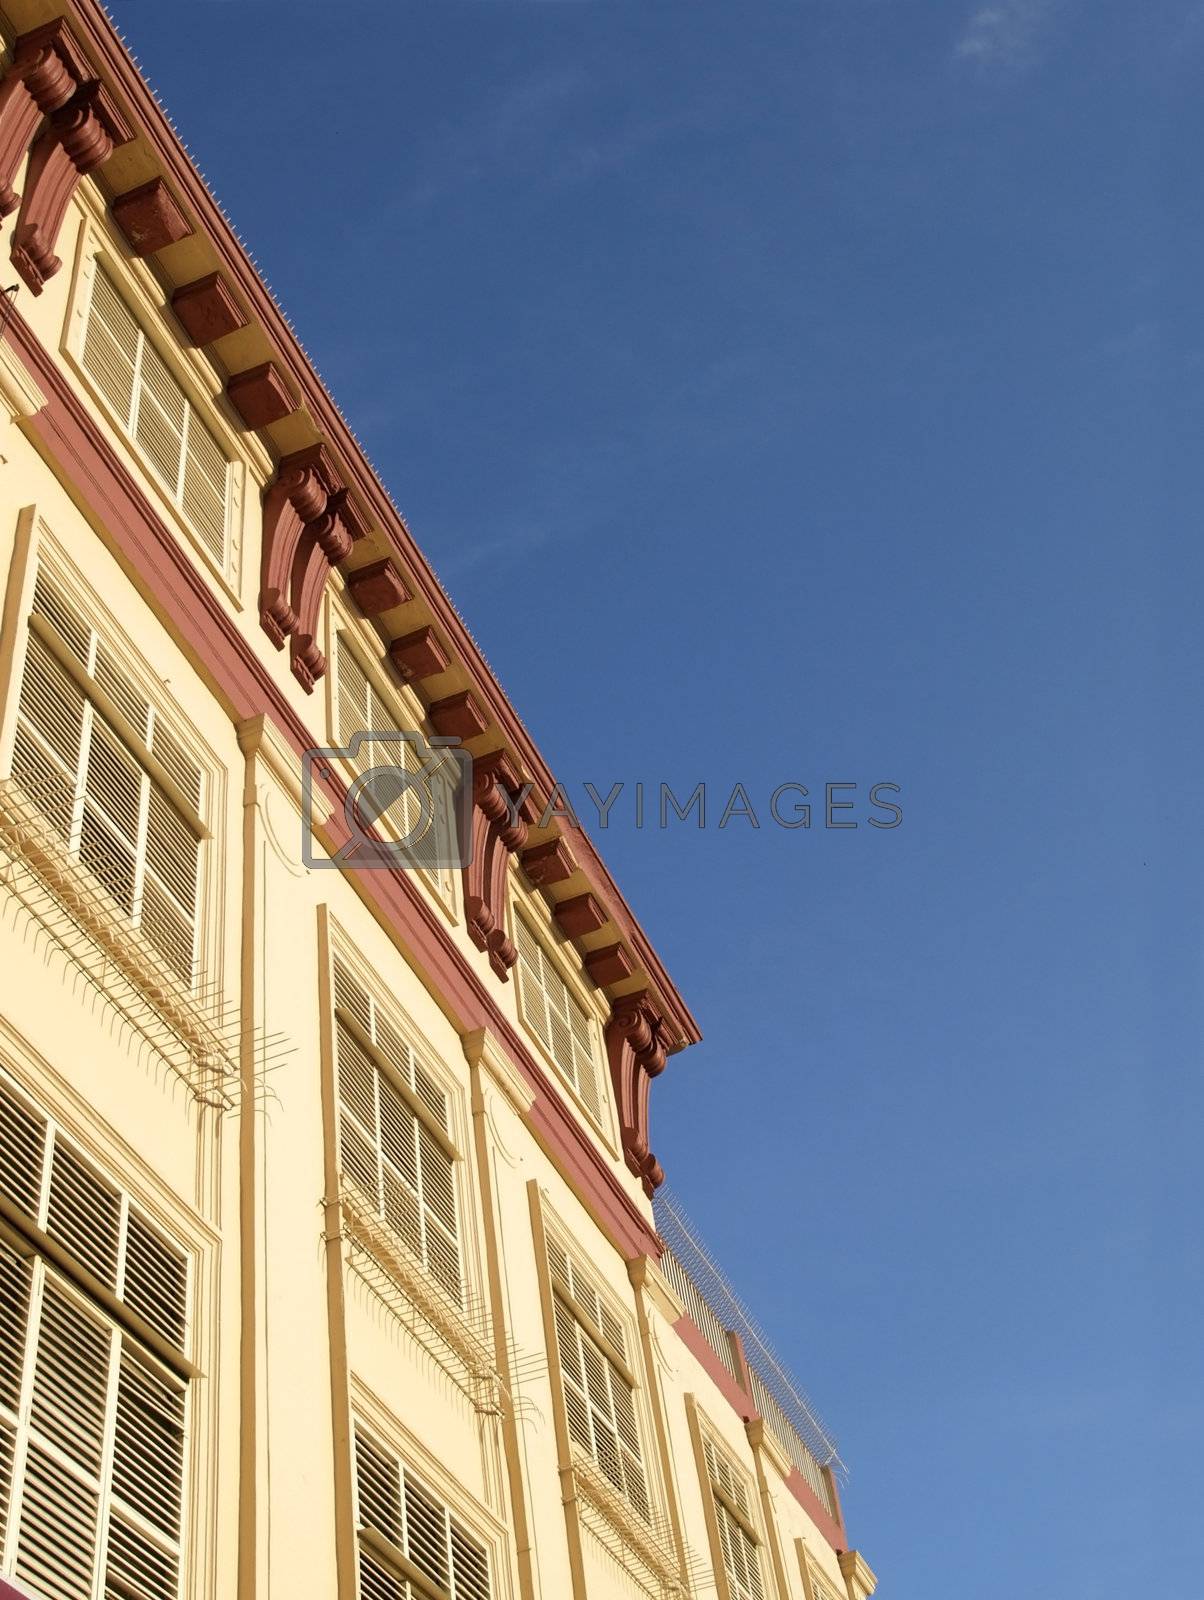 Royalty free image of Urban building with blinds by epixx